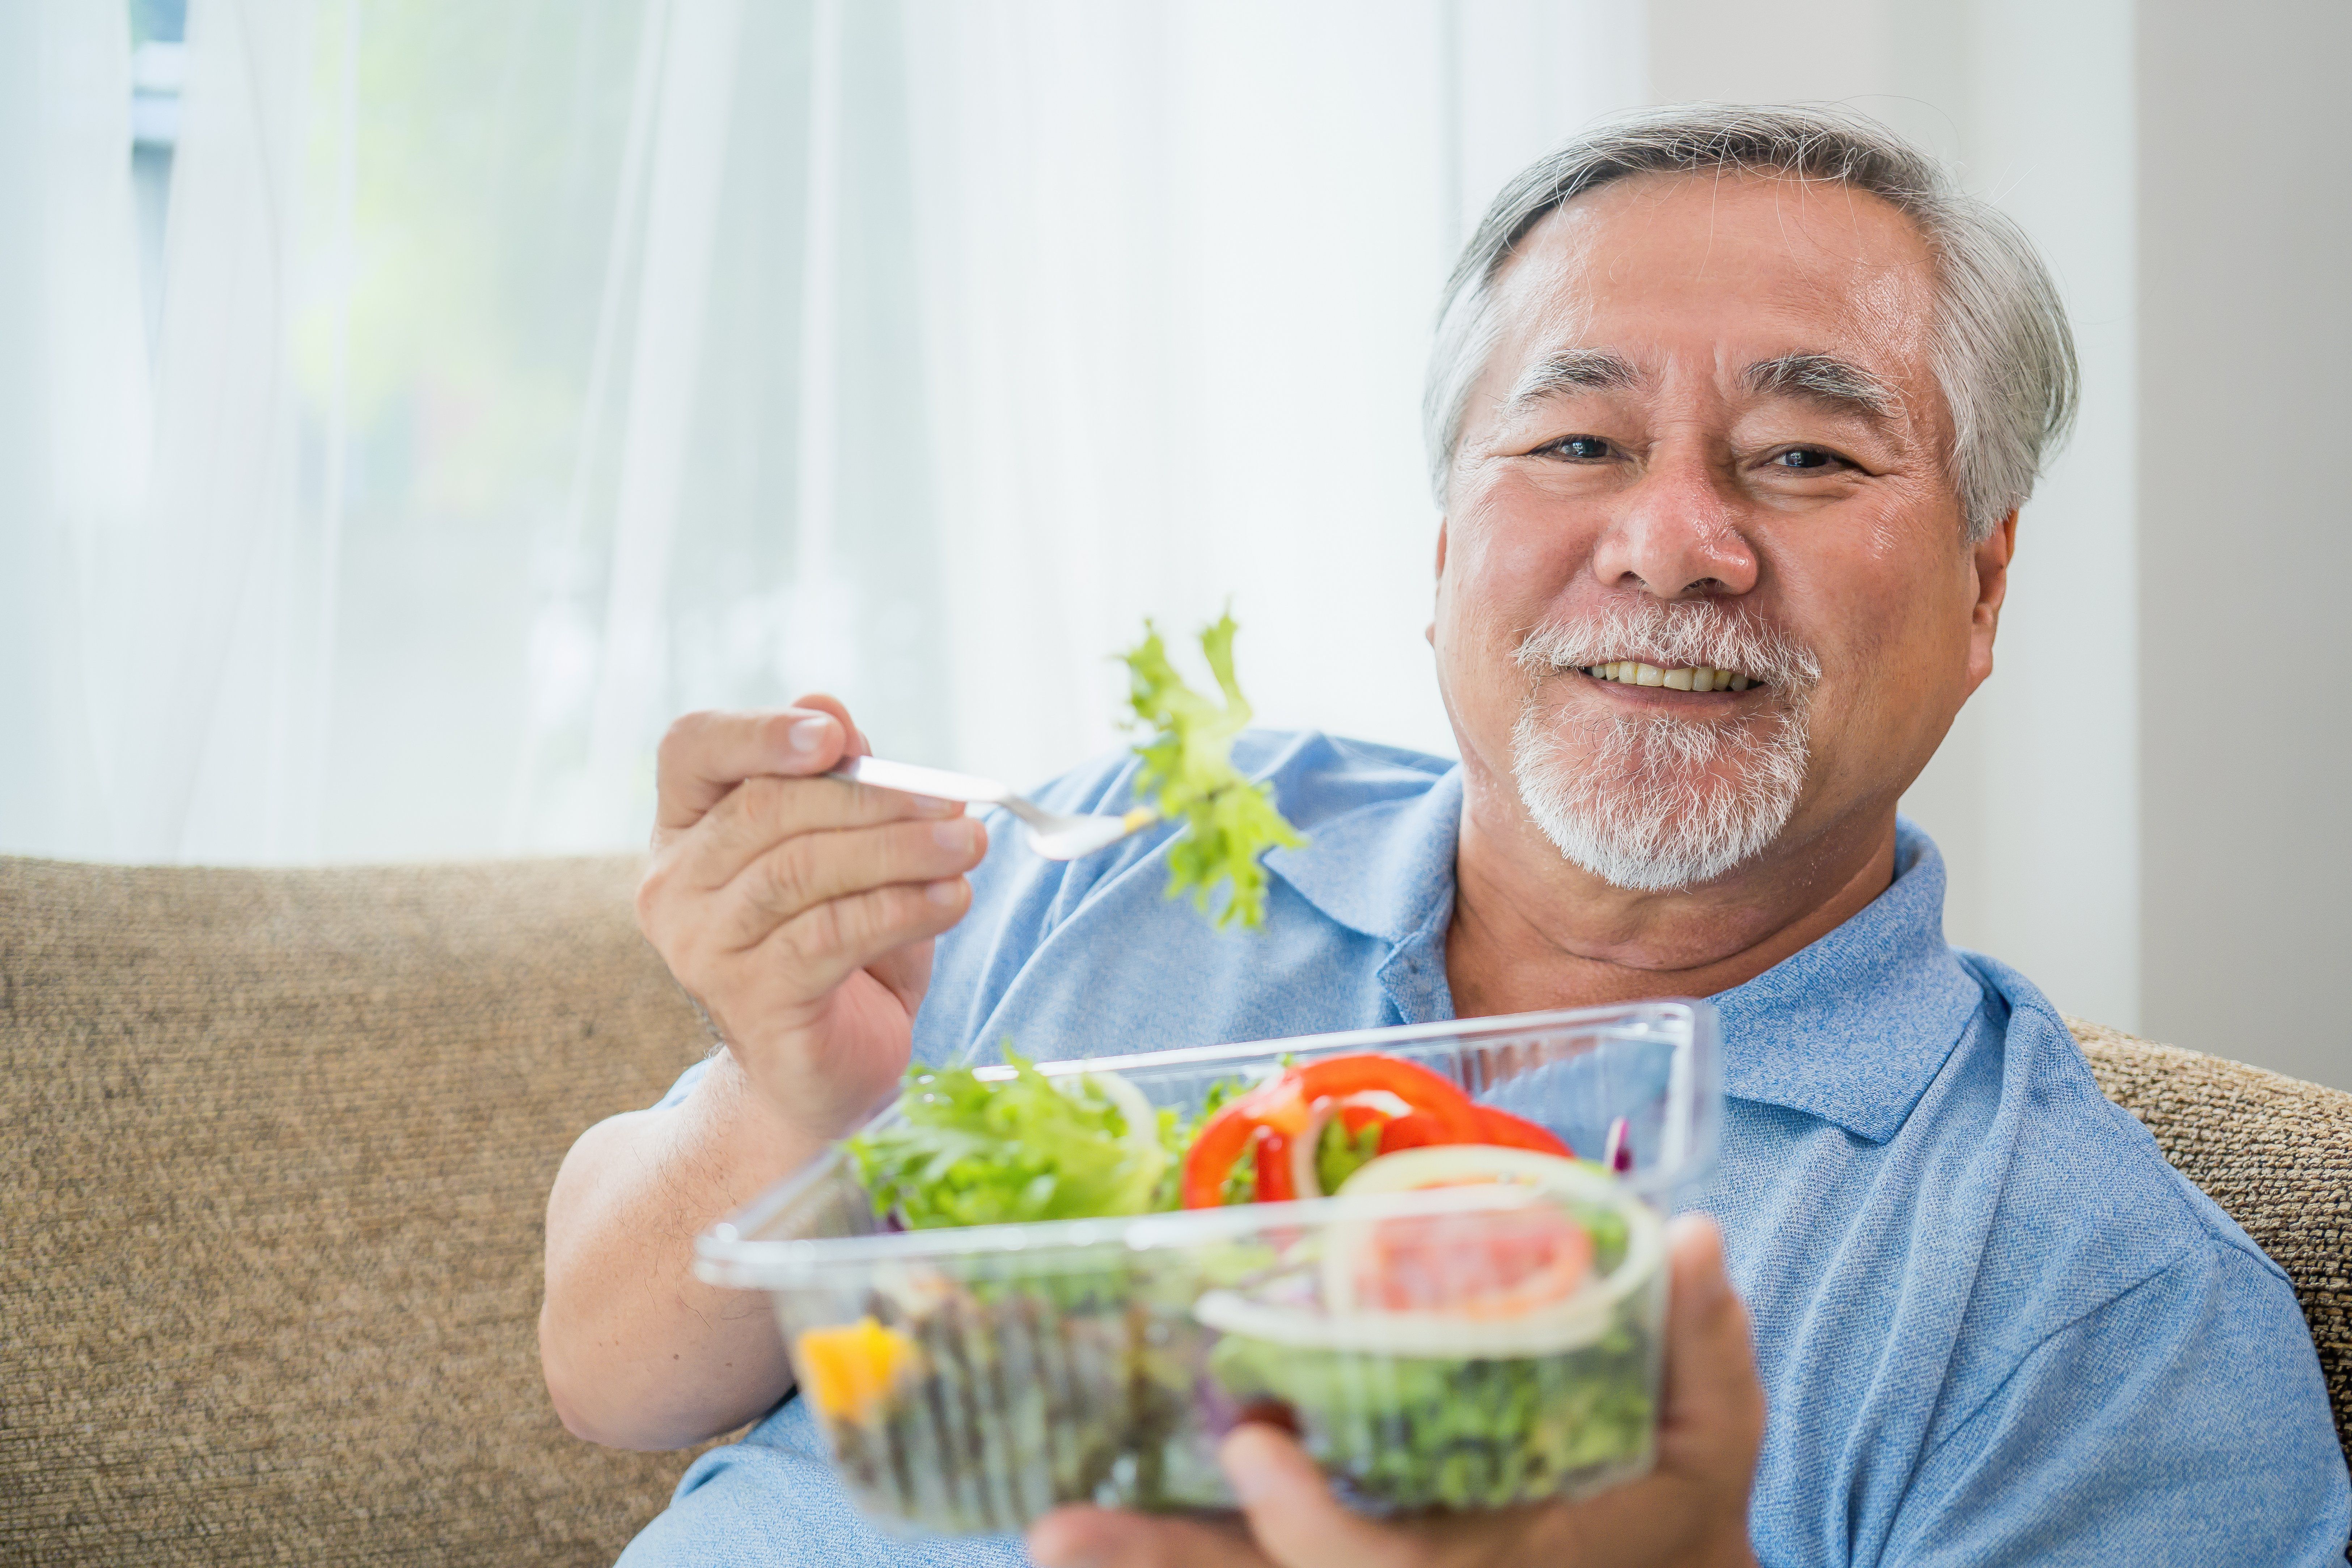 How Does Nutrition Play a Role in Neuropathy Treatment?